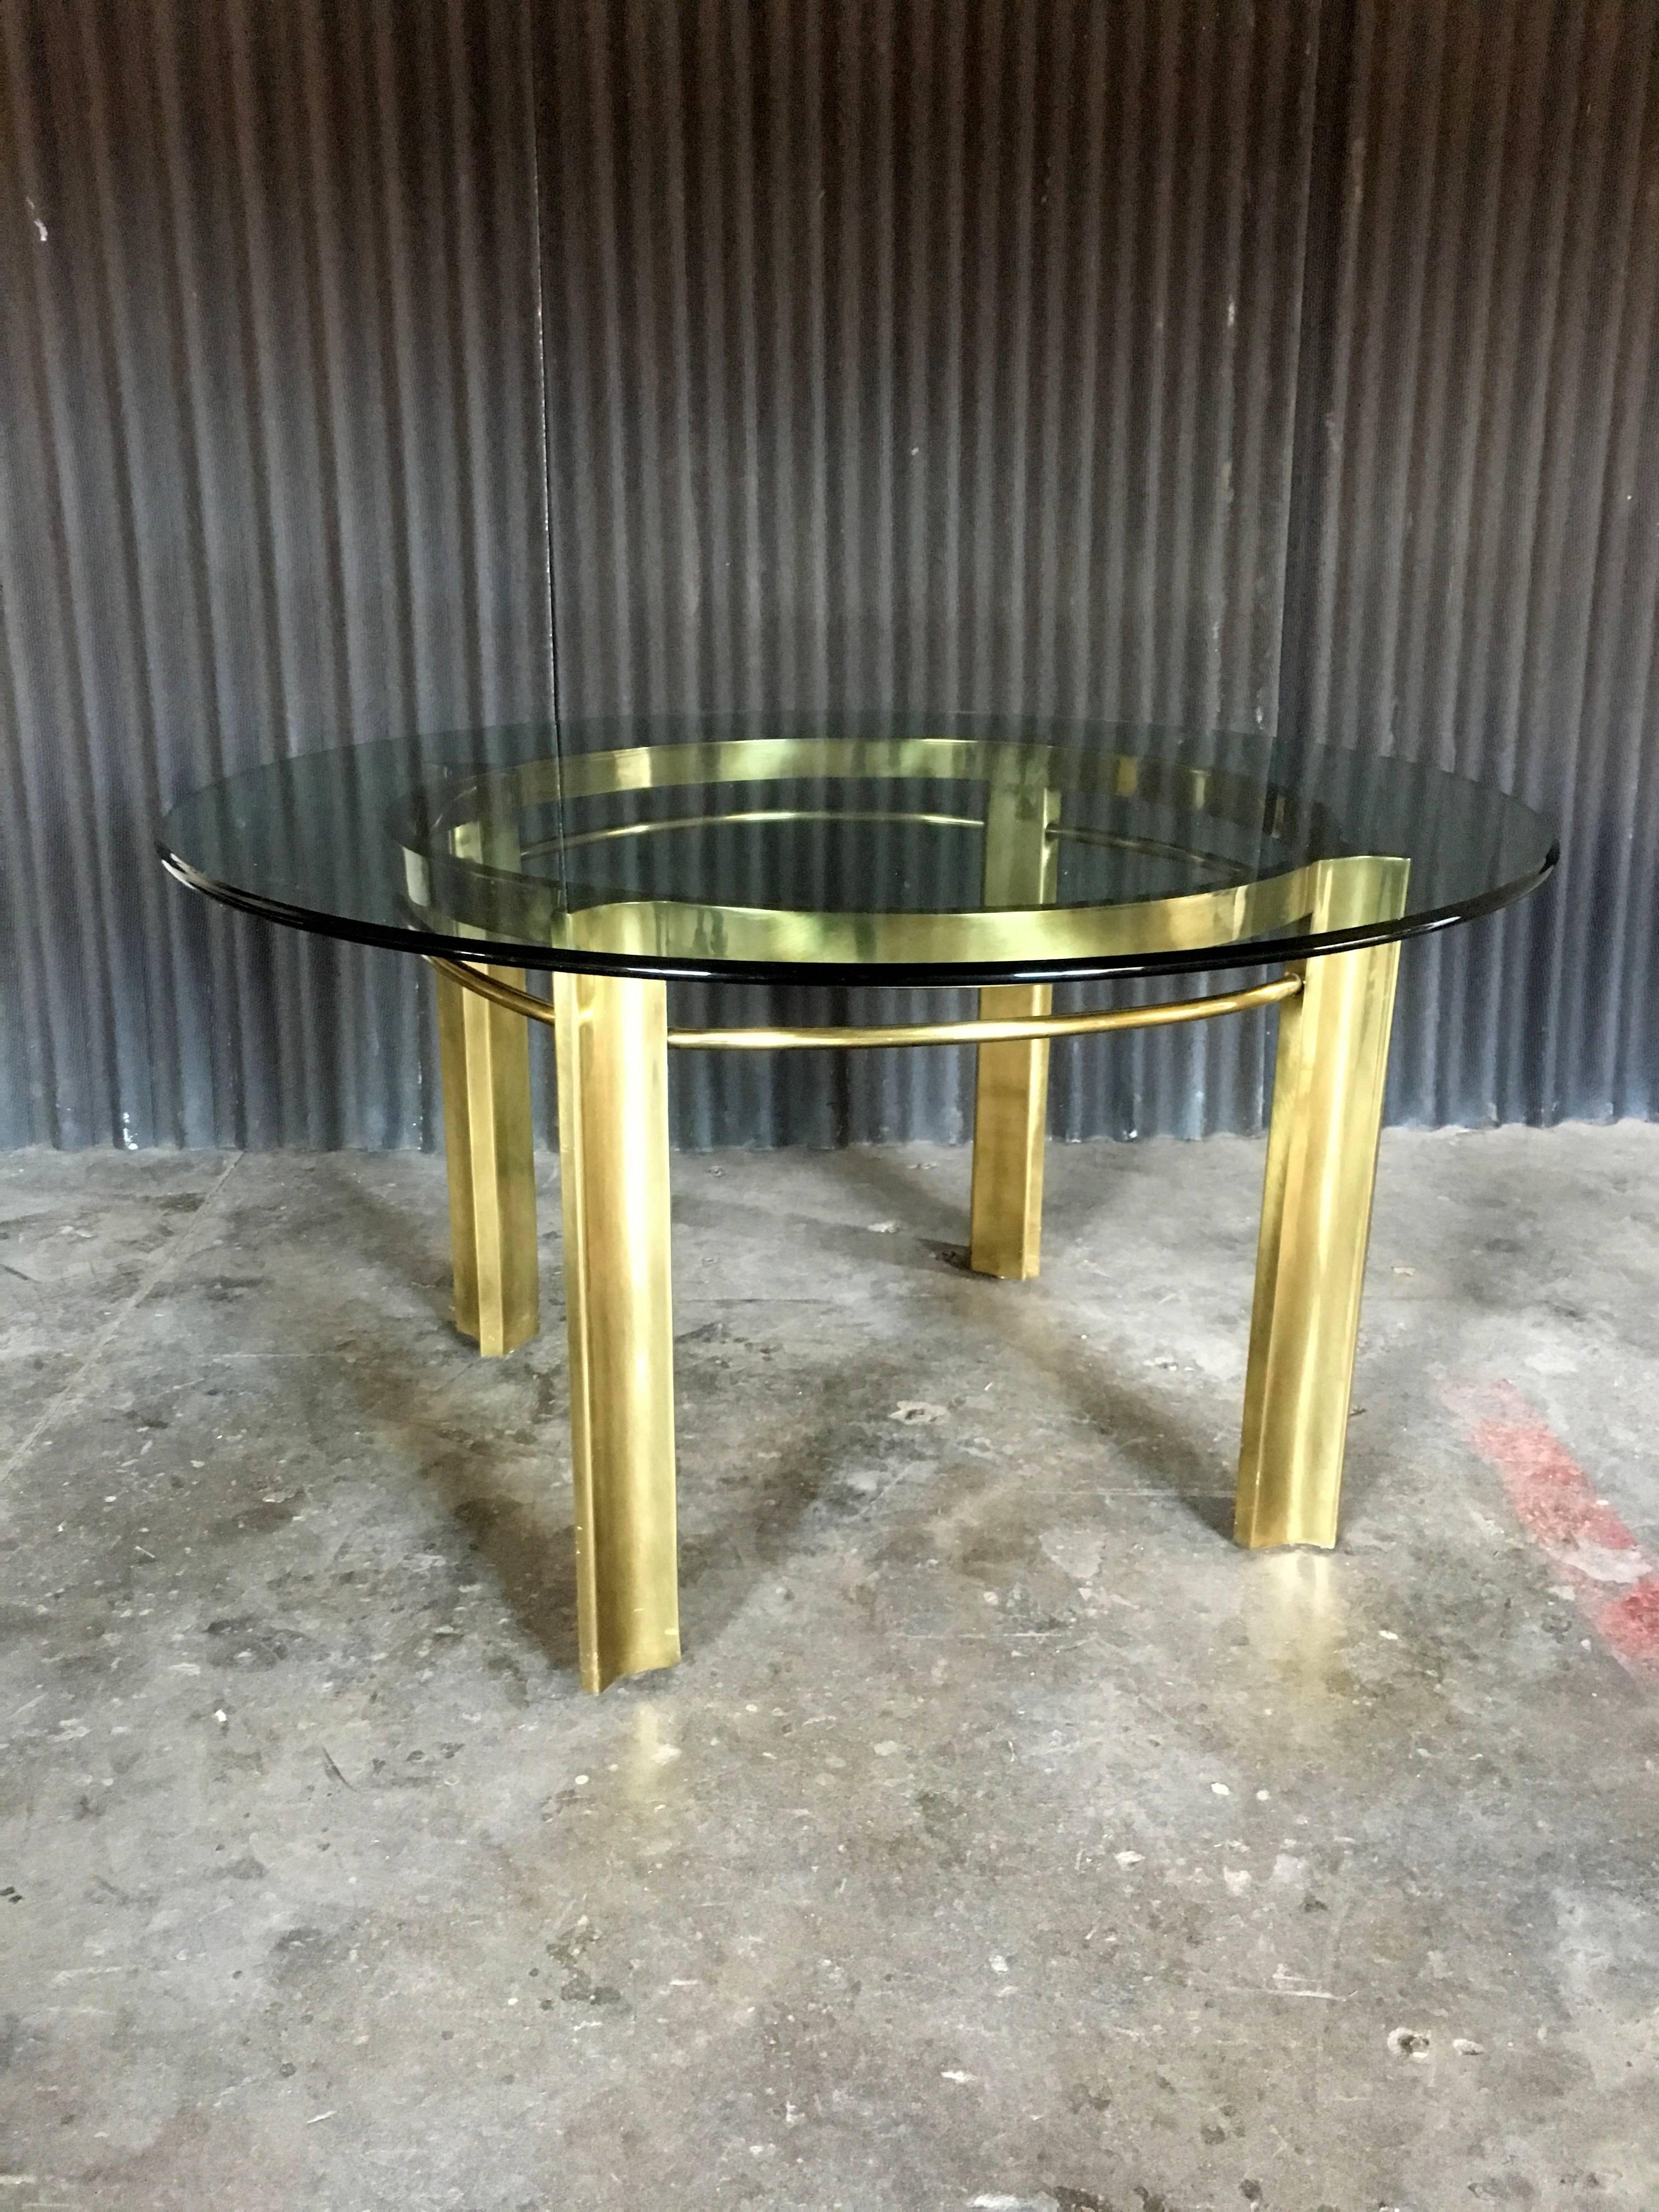 Rare and beautiful dining or game table by Mastercraft.
This gorgeous table is the perfect size and can nicely seat six people.
Brass is in incredible shape with no pitting at all. Smooth and shiny!
Comes with 54